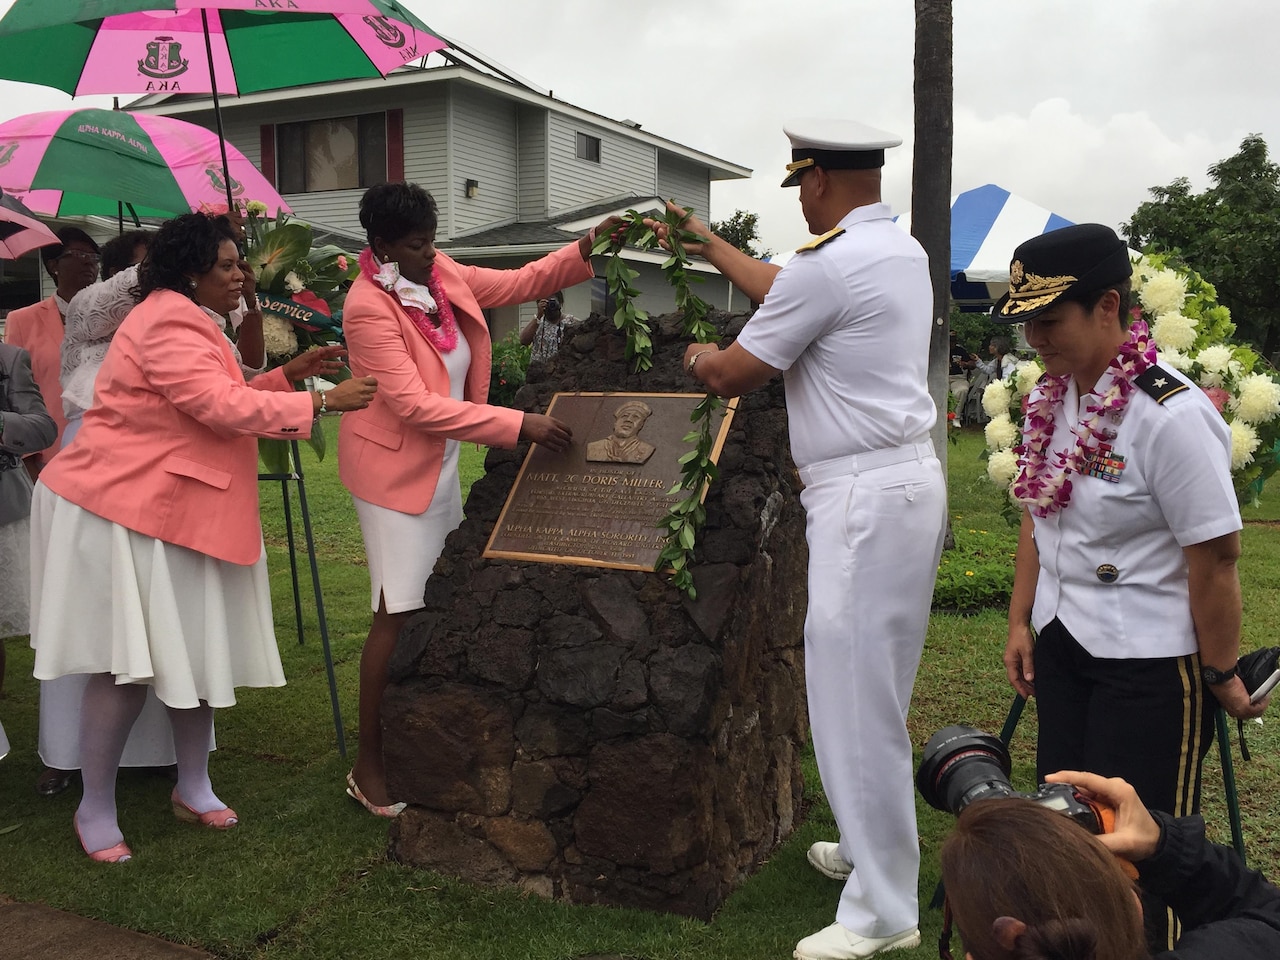 Navy Rear Adm. John Fuller, the commander of Navy Region Hawaii, and of Naval Surface Group, Middle Pacific, takes part in the ceremony to rededicate a plaque in honor of Navy Mess Attendant Second Class Doris "Dorie" Miller, Honolulu, Hawaii, Dec. 8, 2016. DoD photo by Lisa Ferdinando